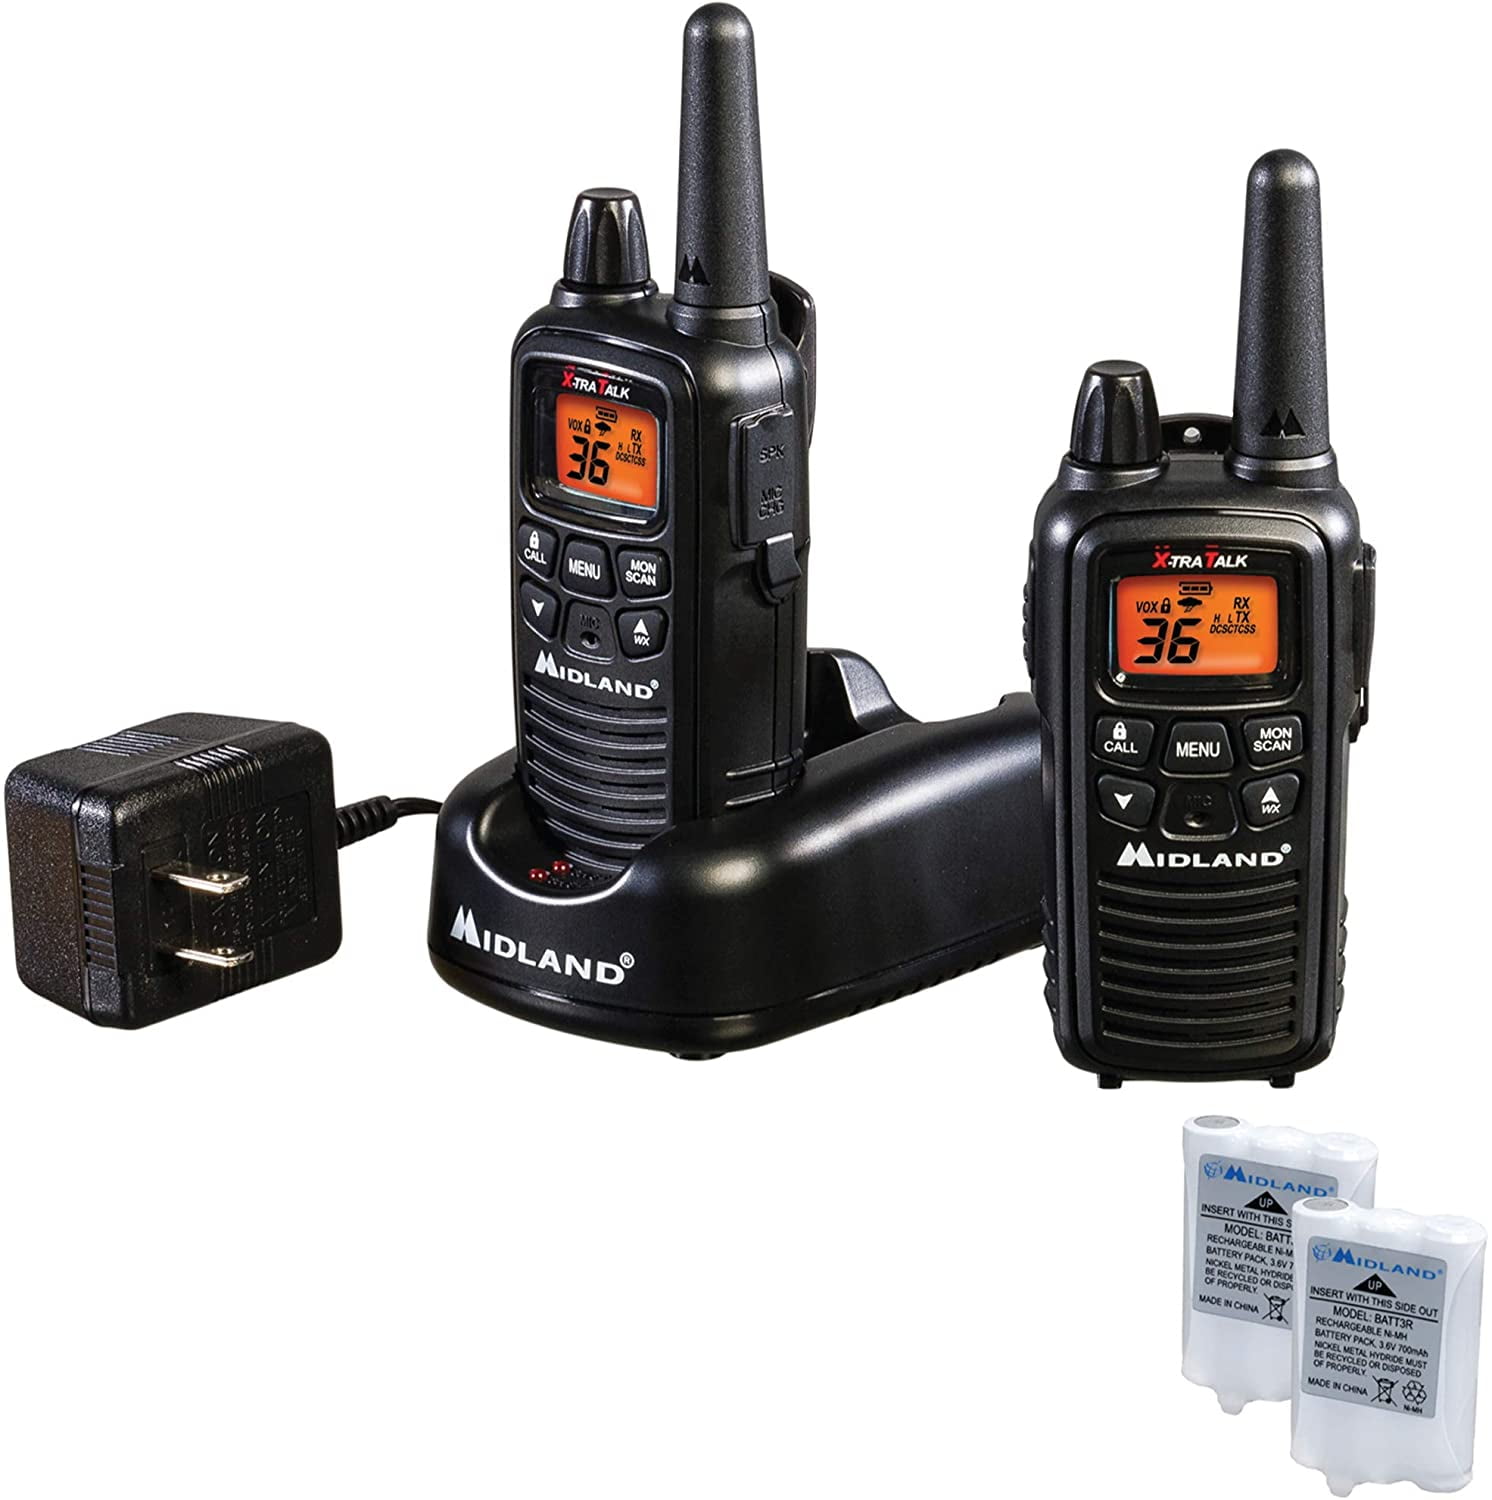 Round down gloss Month Midland - LXT600VP3, 36 Channel FRS Two-Way Radio - Up to 30 Mile Range Walkie  Talkie, 121 Privacy Codes, NOAA Weather Scan + Alert (Pair Pack) (Black),  2-WAY RADIOS -.., By Visit the Midland Store - Walmart.com